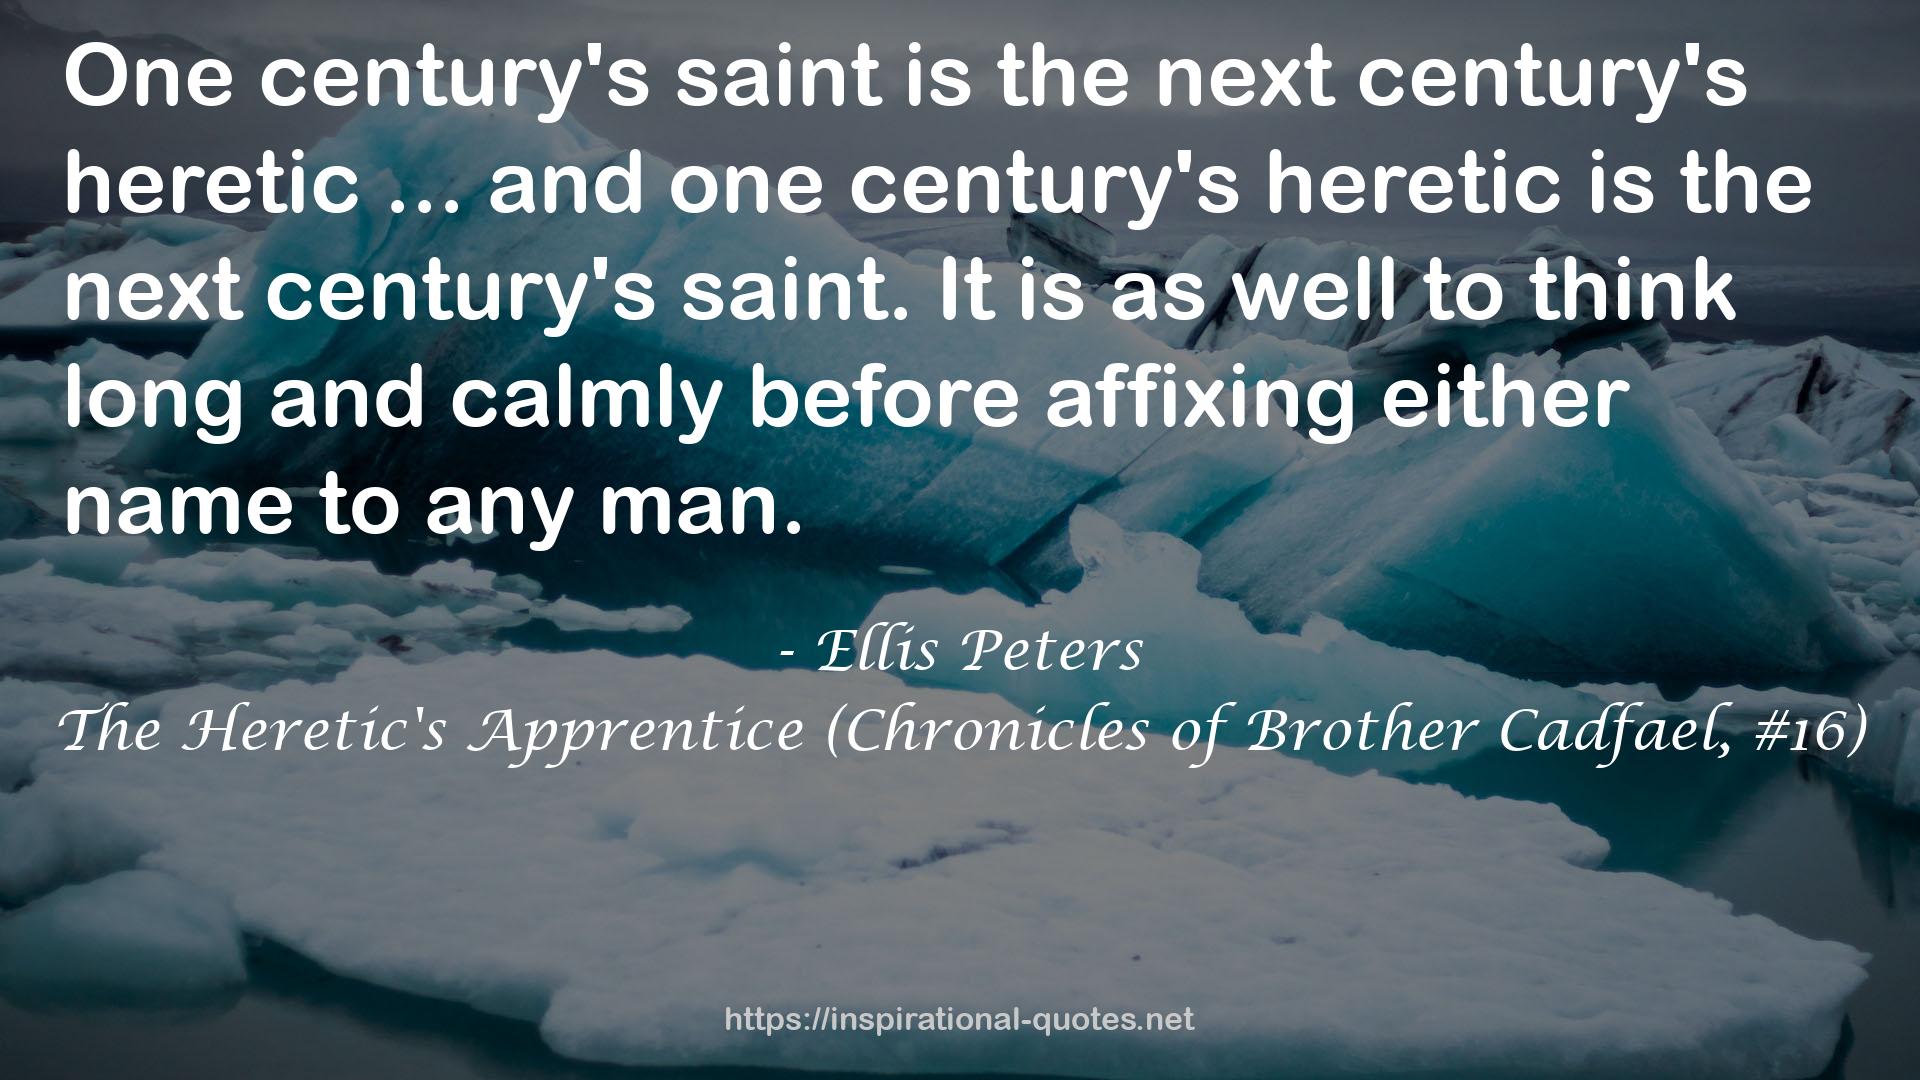 The Heretic's Apprentice (Chronicles of Brother Cadfael, #16) QUOTES